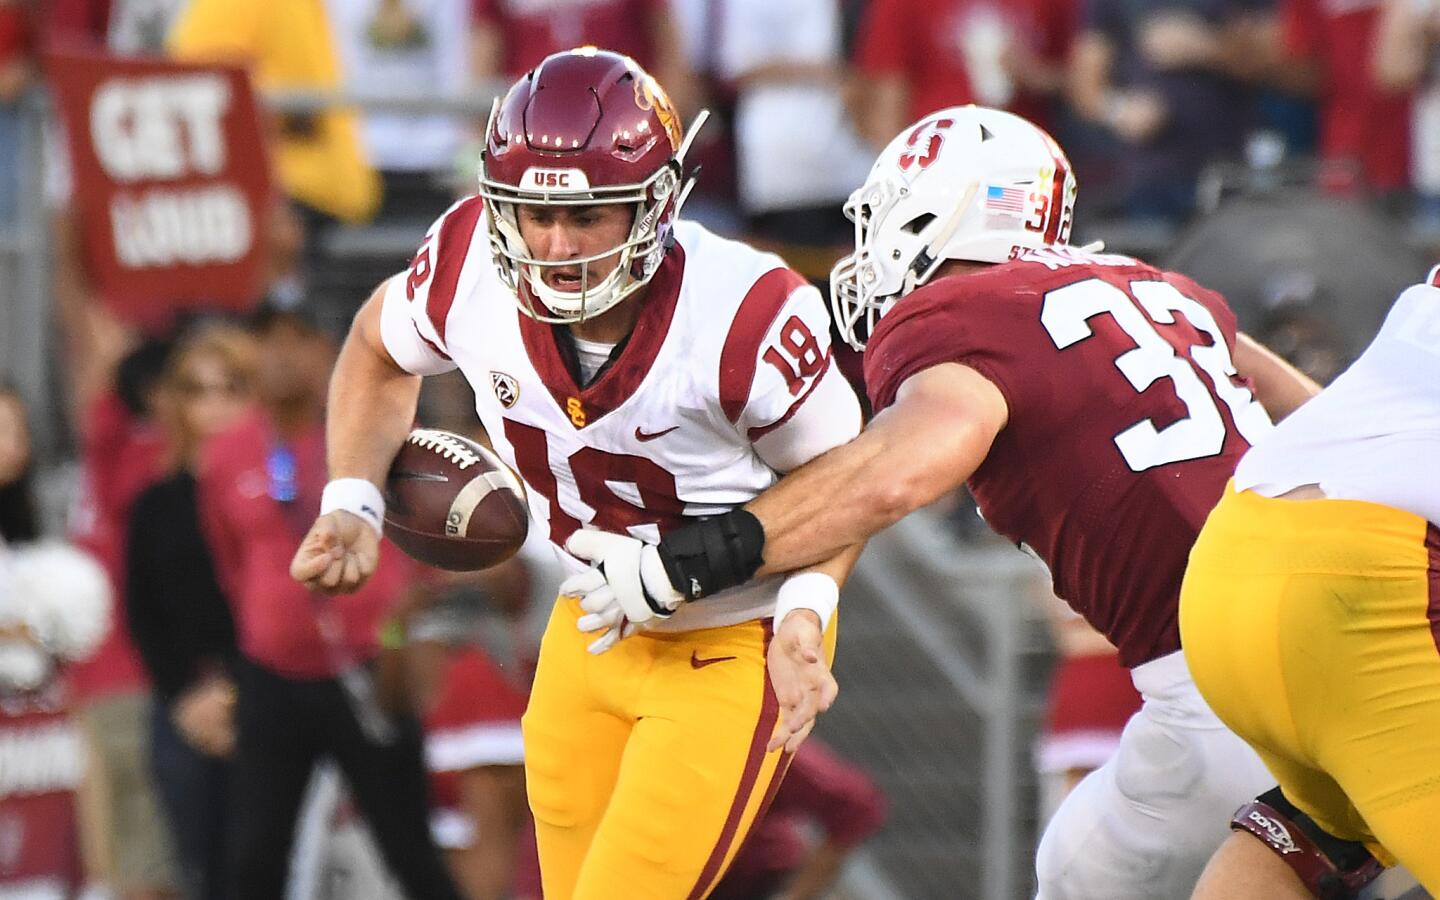 USC quarterback J.T. Daniels is stripped of the ball by Stanford linebacker Joey Alfieri on 4th down in the 2nd quarter.